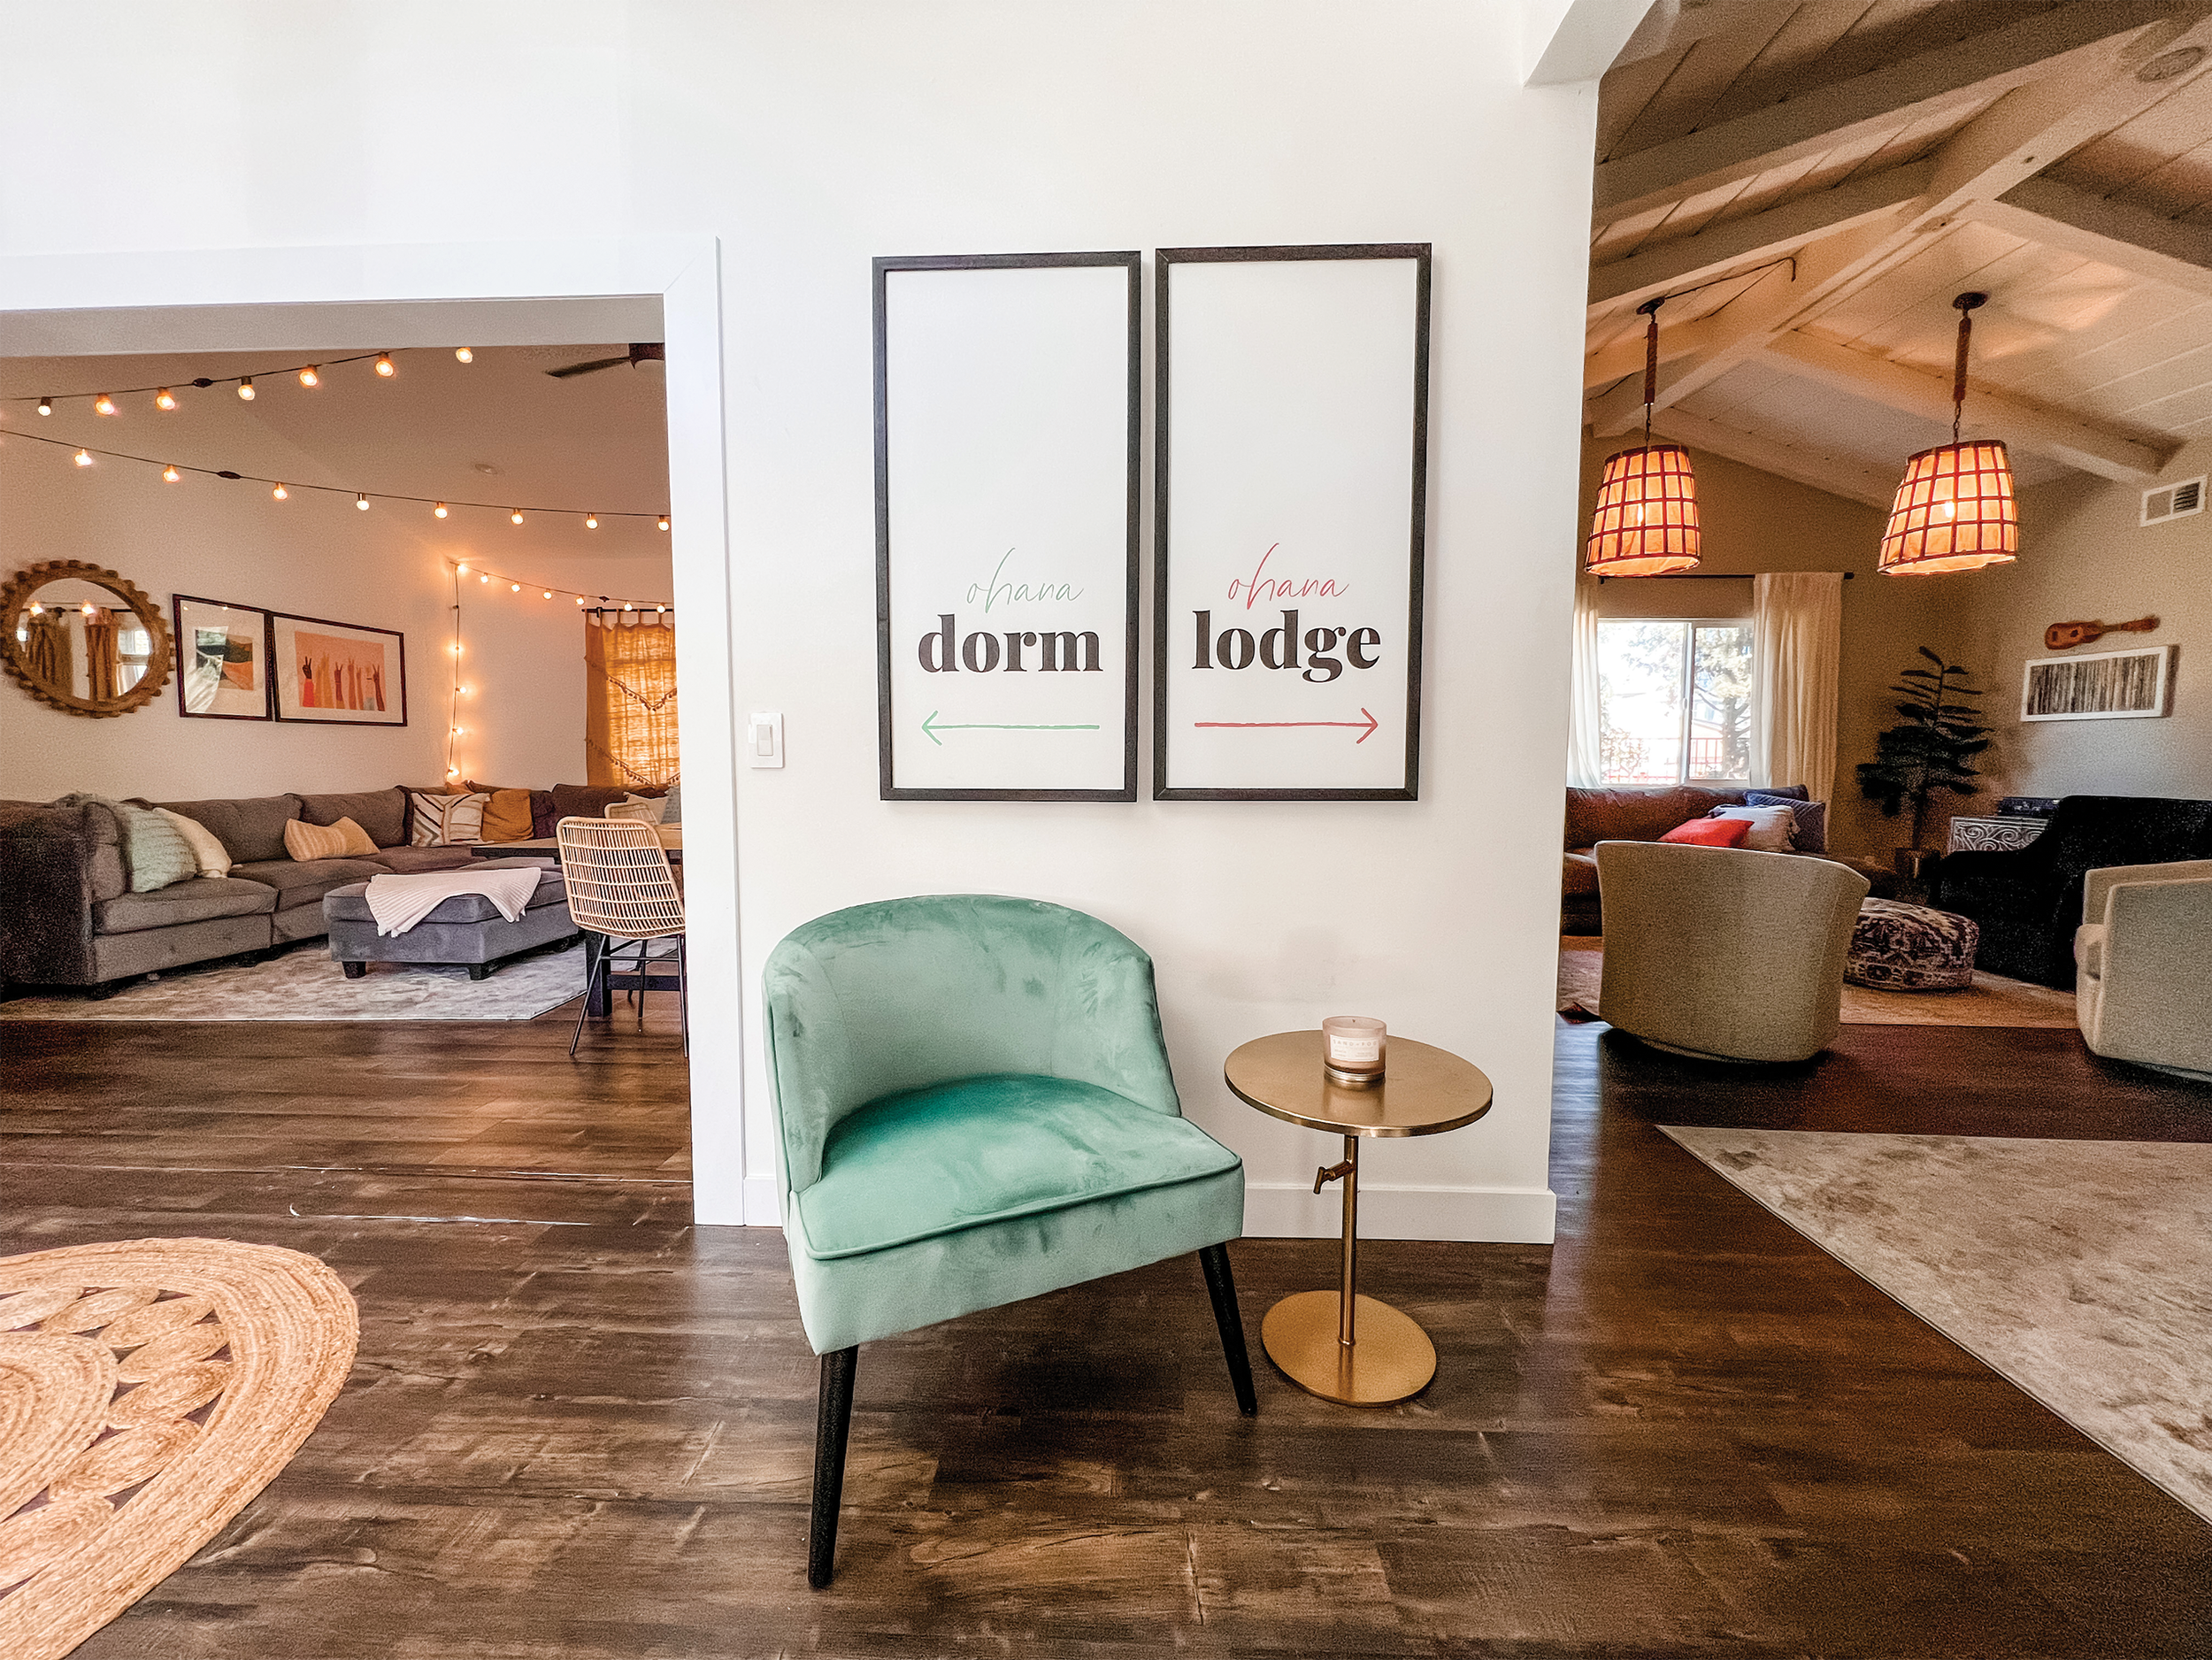 Ohana dorm: signs on the wall (ohana dorm with arrow pointing left & ohana lodge with arrow pointing right). You can see the dorm on th eleft side and the lounge on the right side